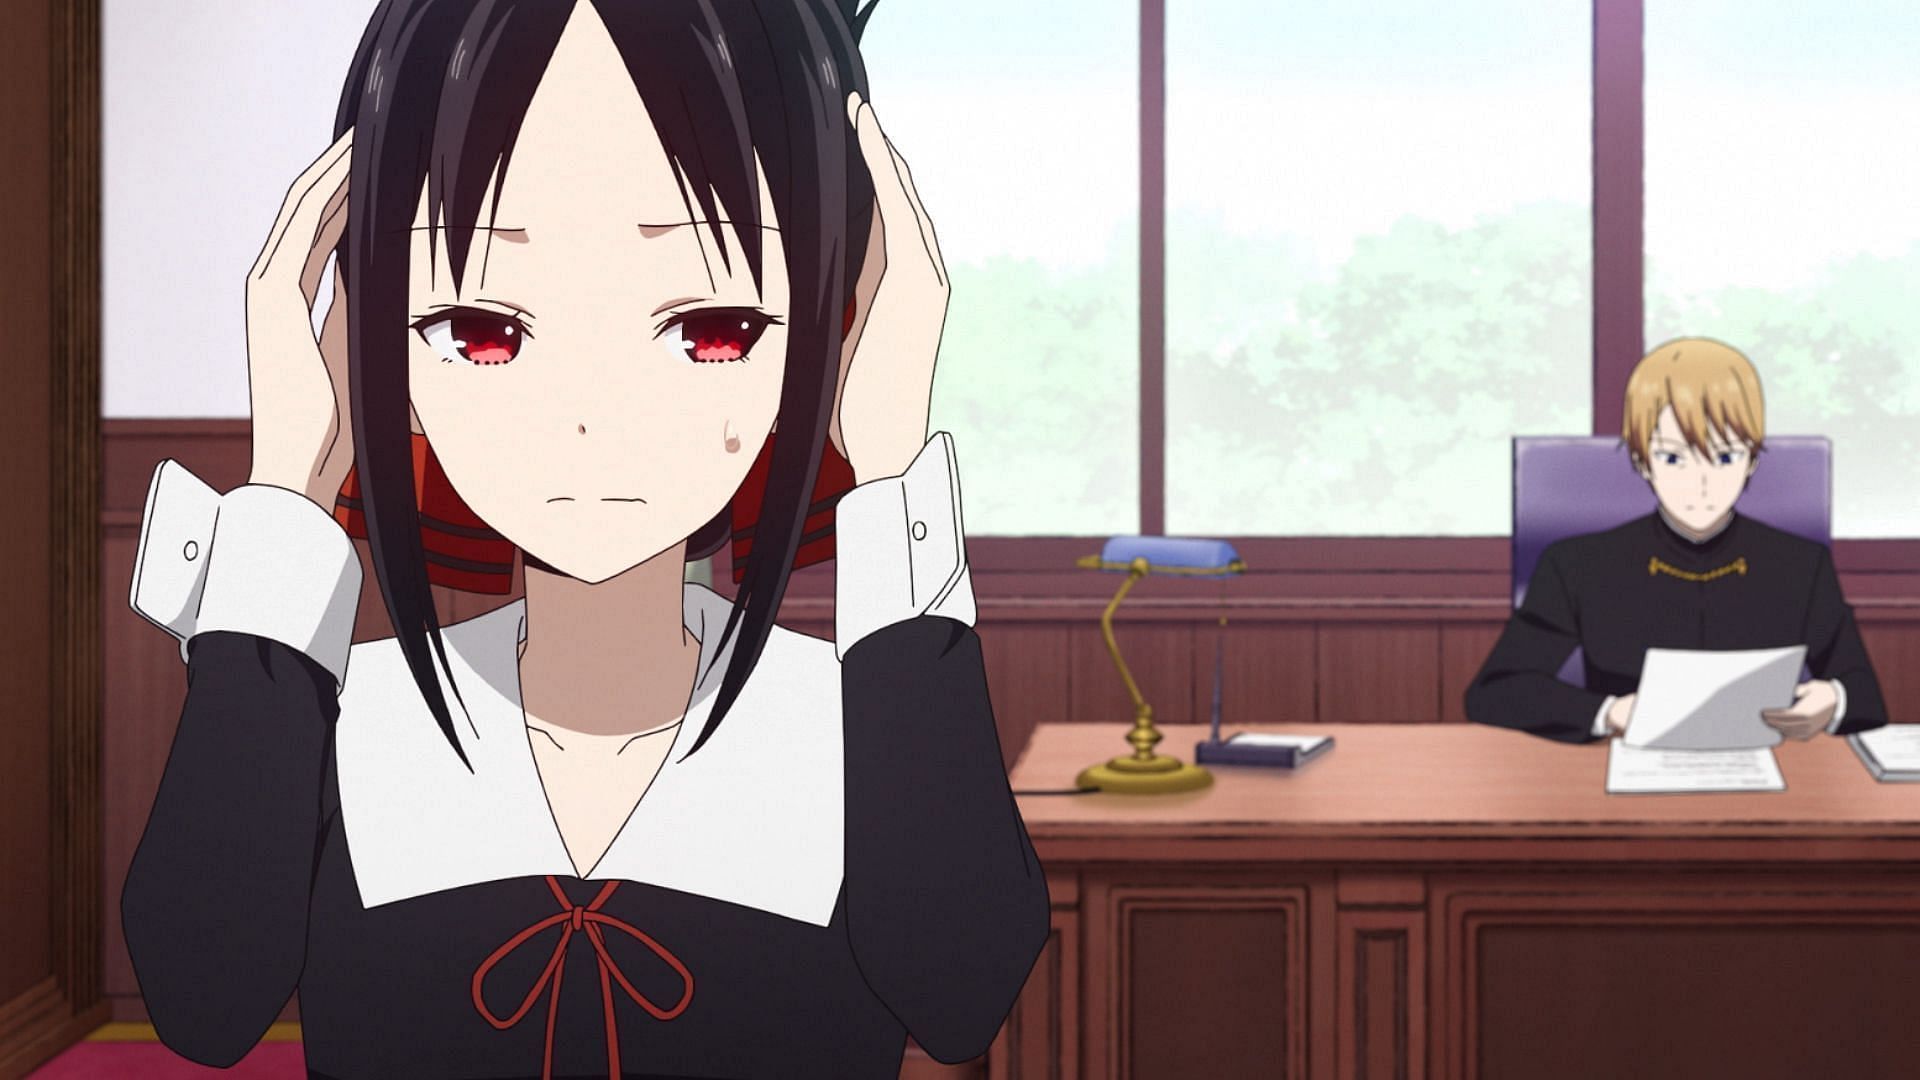 A still from the anime series featuring Kaguya and Shirogane (Image via A-1 Pictures)